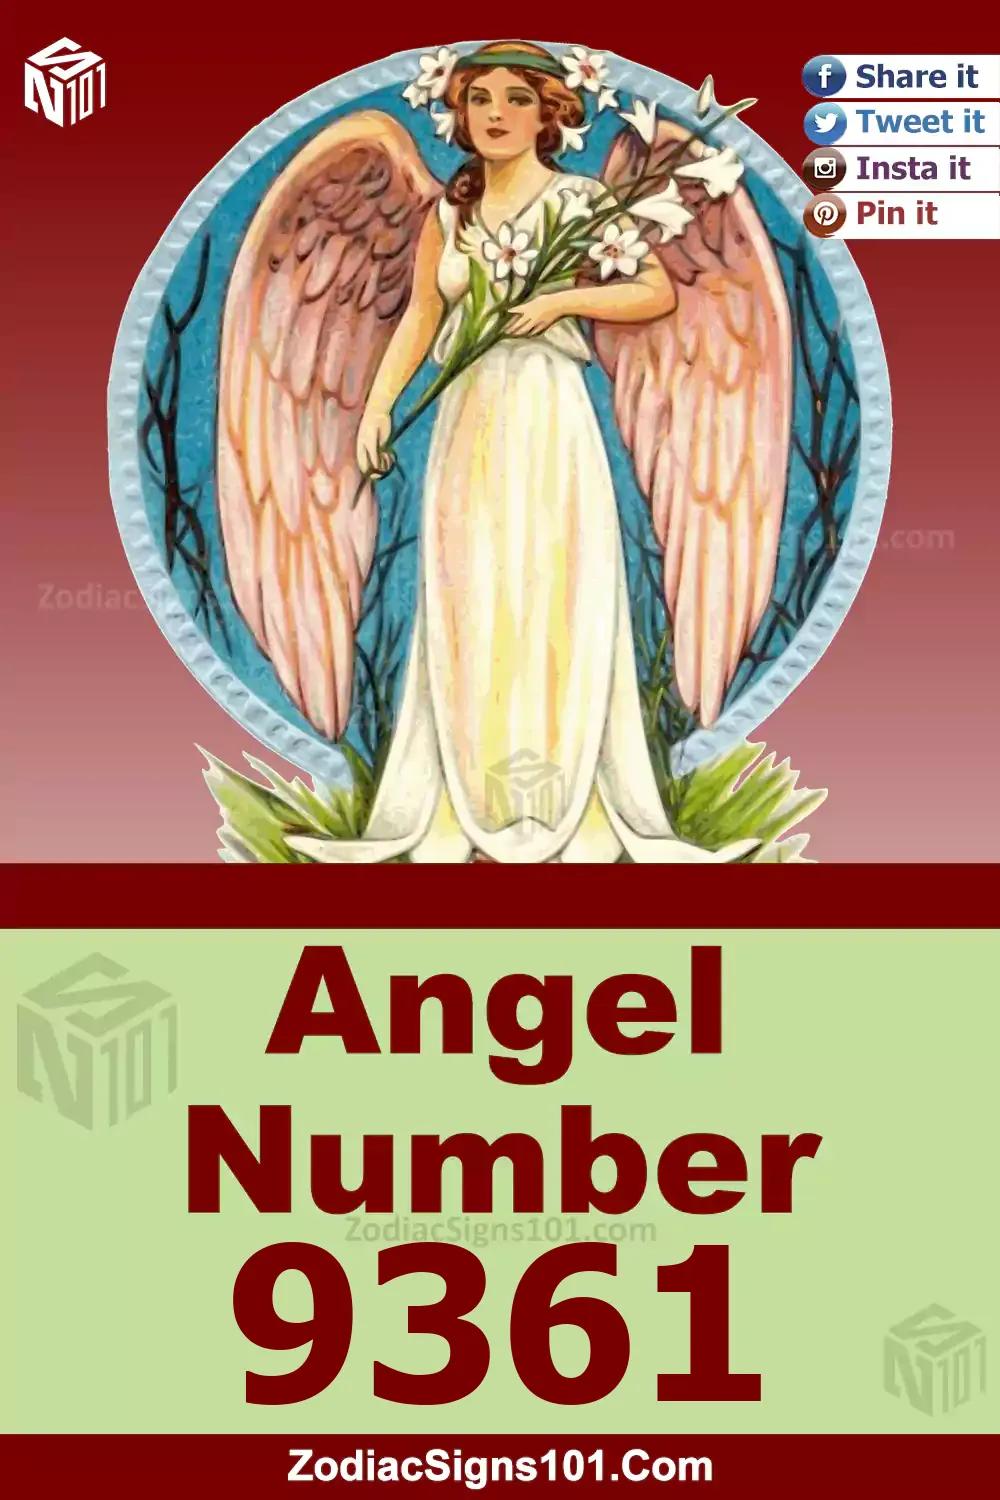 9361 Angel Number Meaning